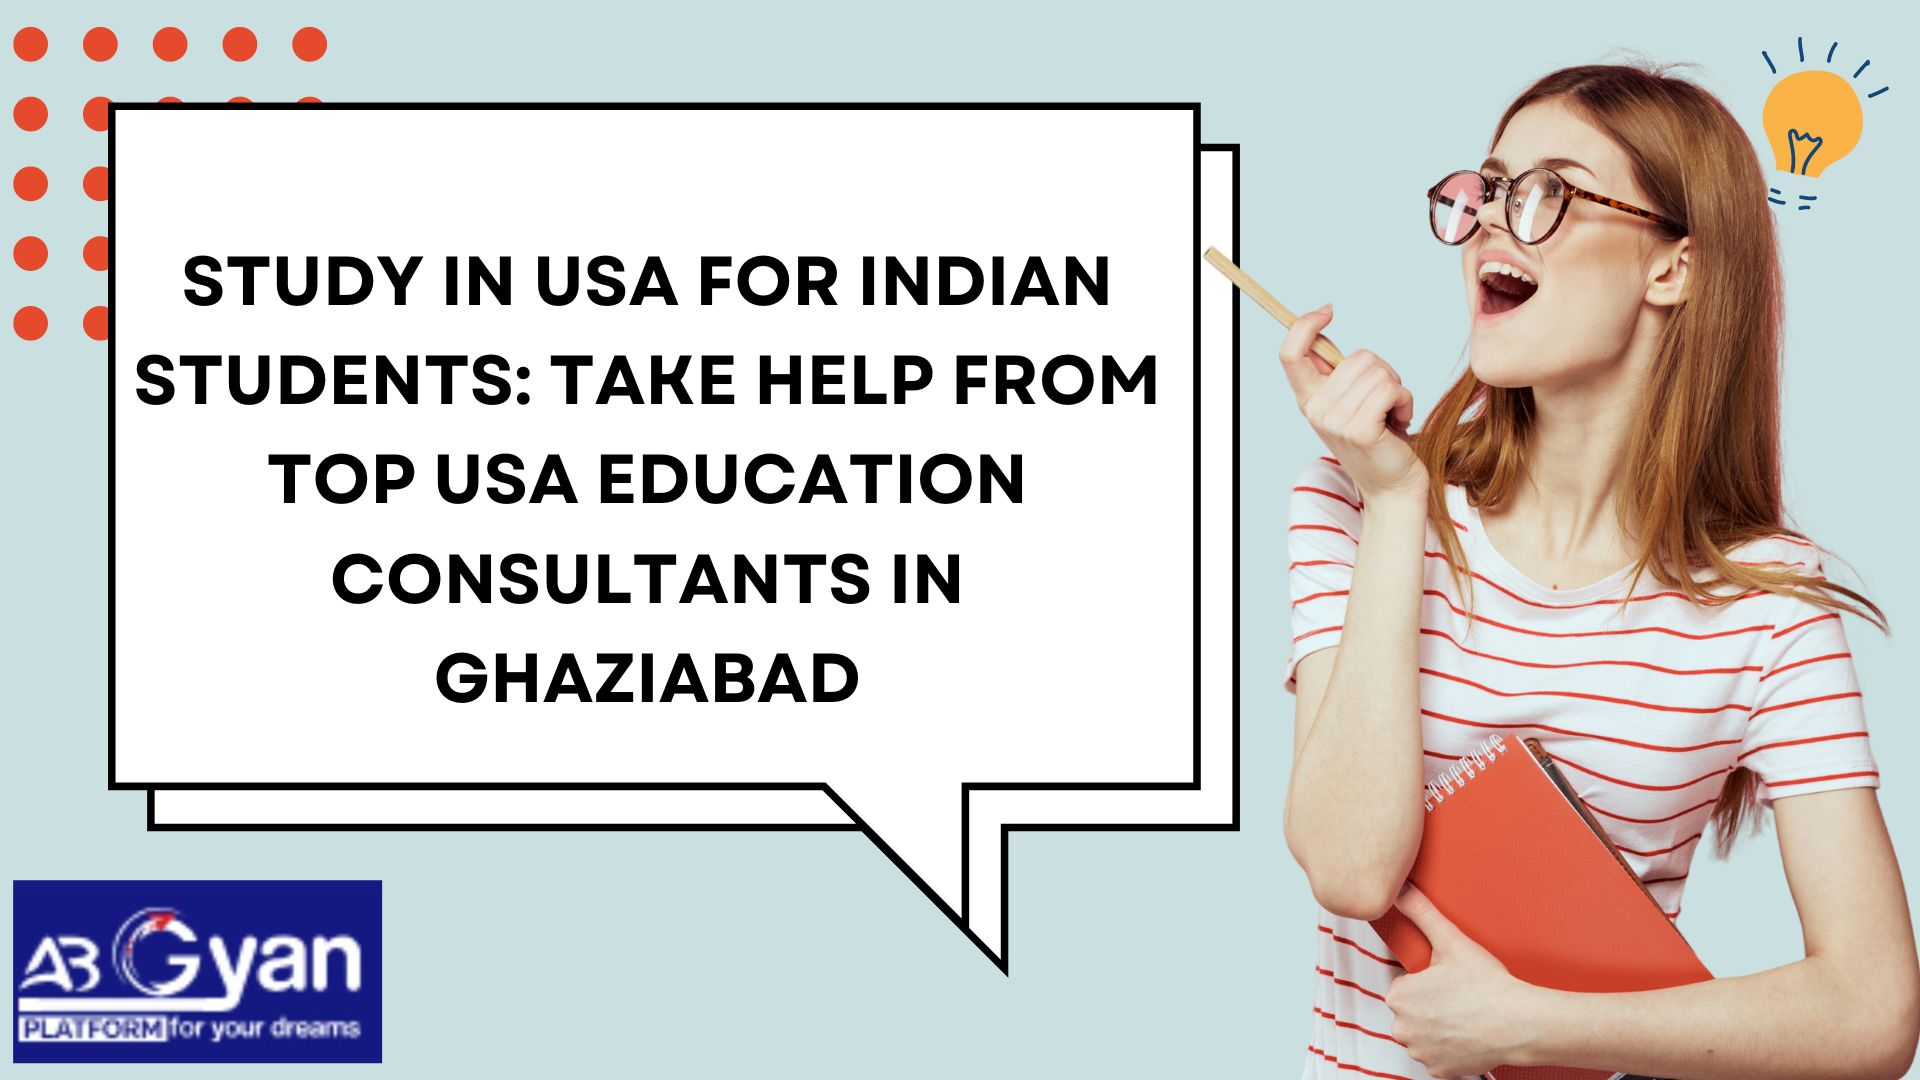 Study in USA for Indian Students: Take help from top USA Education Consultants in Ghaziabad - XGenBlogs: Next-Generation Bloggers Destination